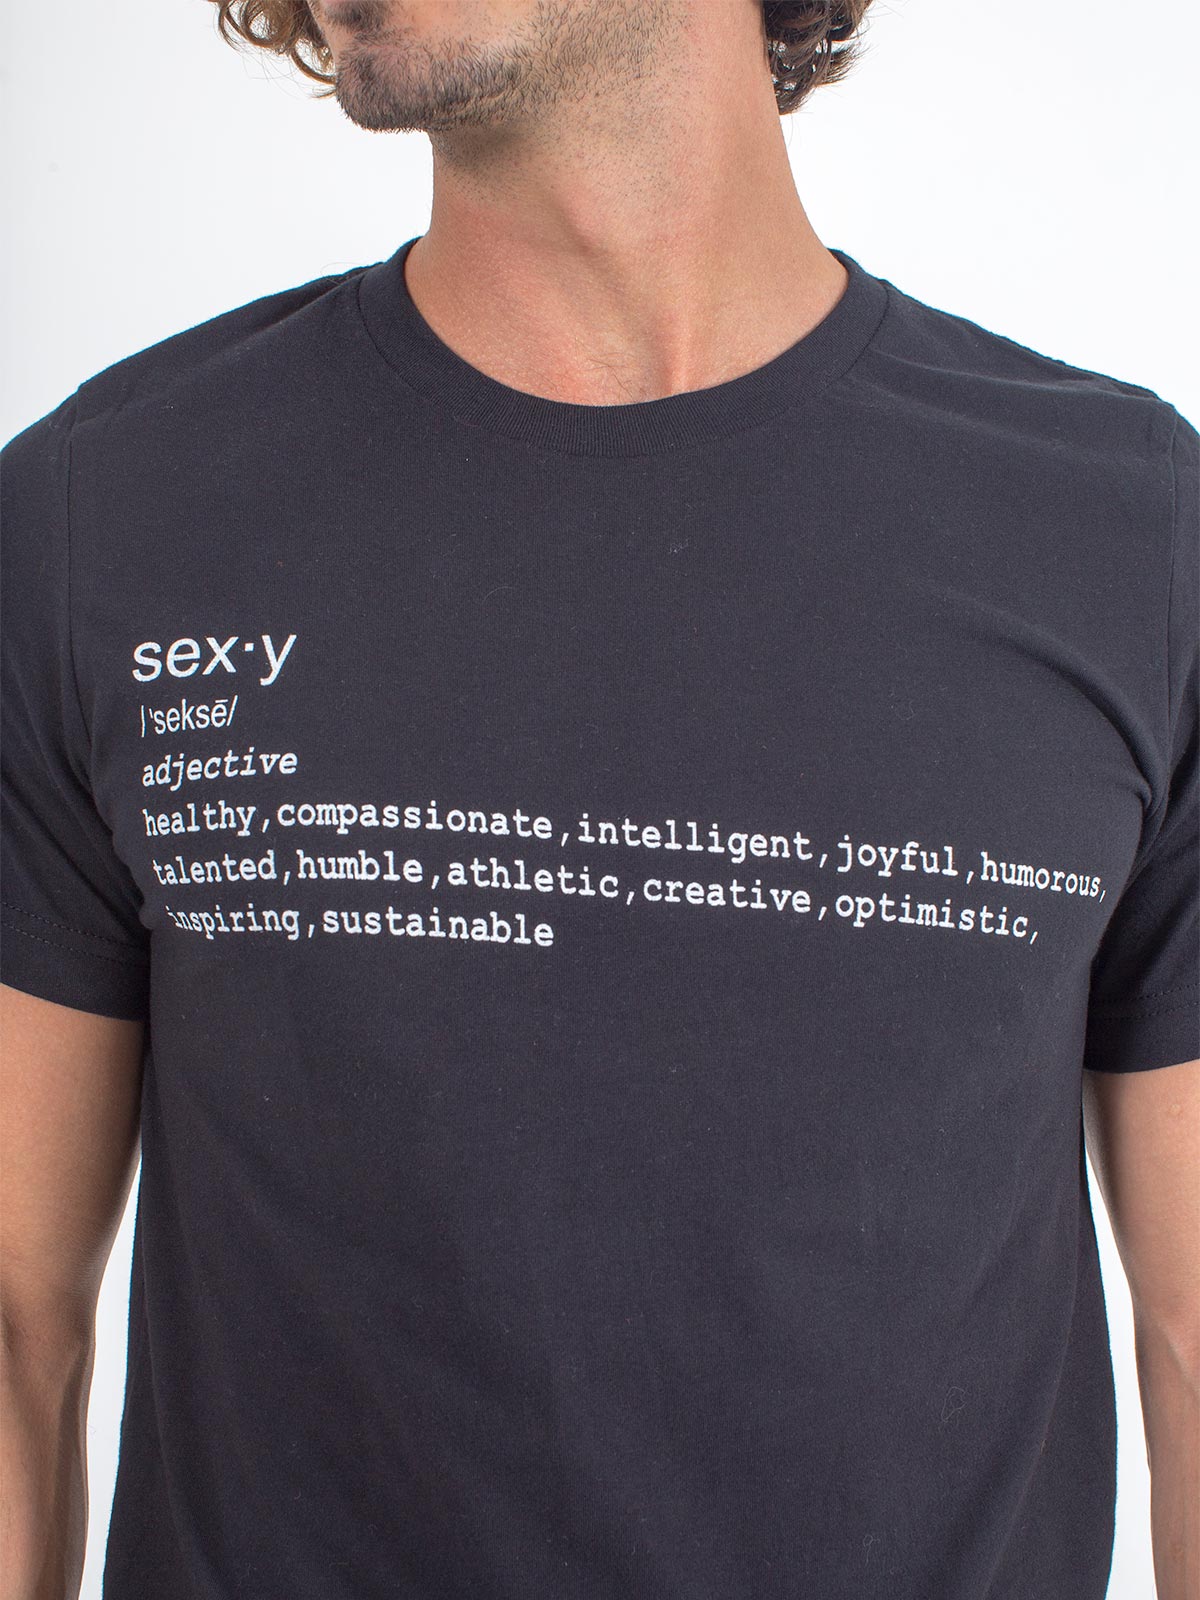 Men's Sexy Brand Sexy Definition Tee T-Shirt Black Close up